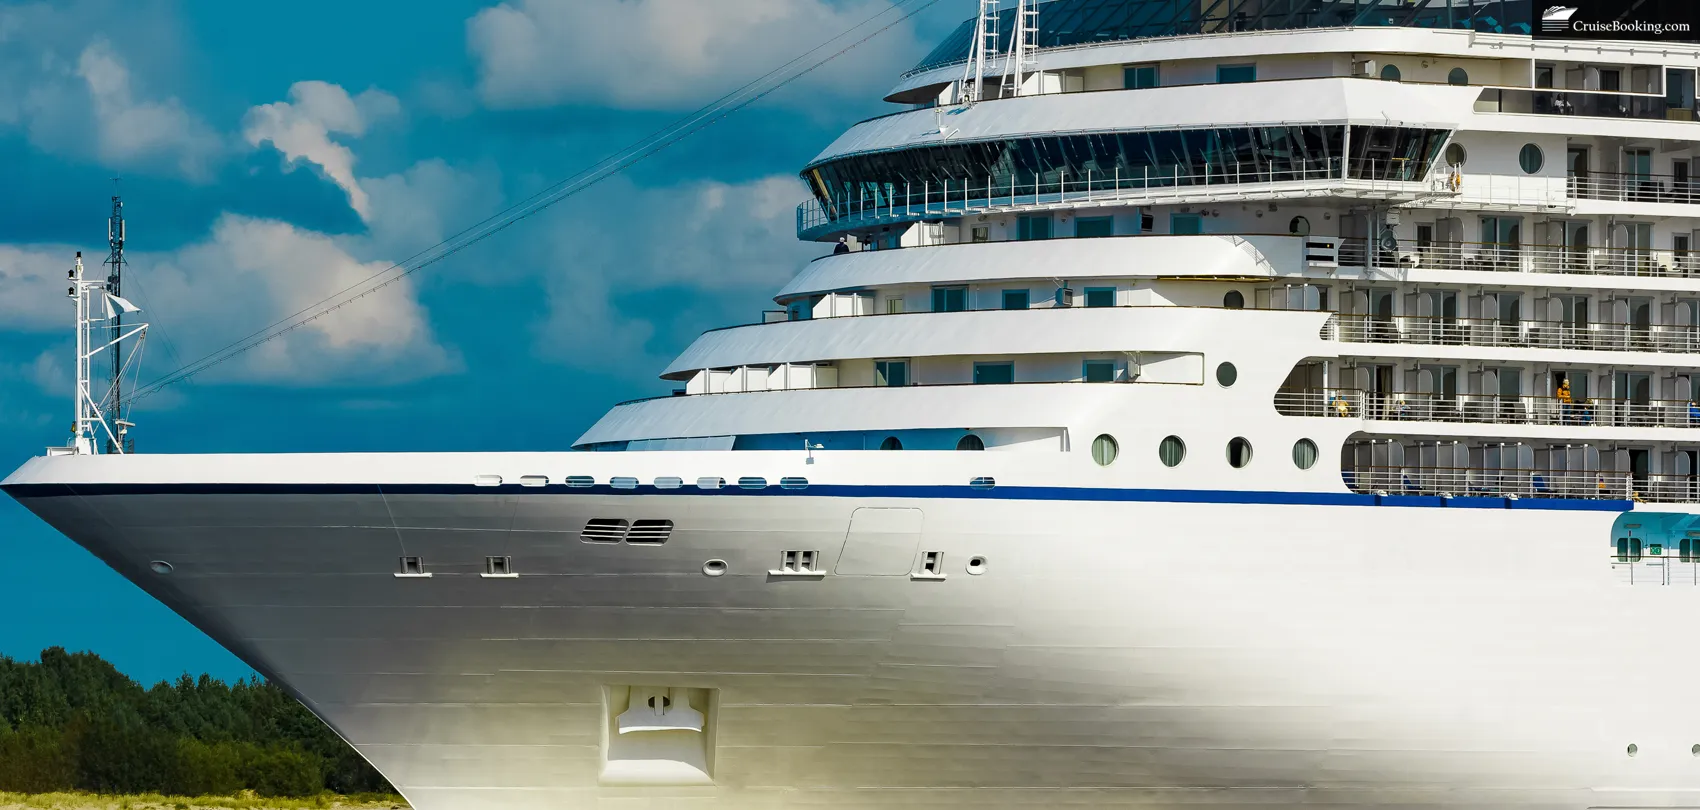 Sale on Oceania Cruises includes ‘All Three Amenities for Free’